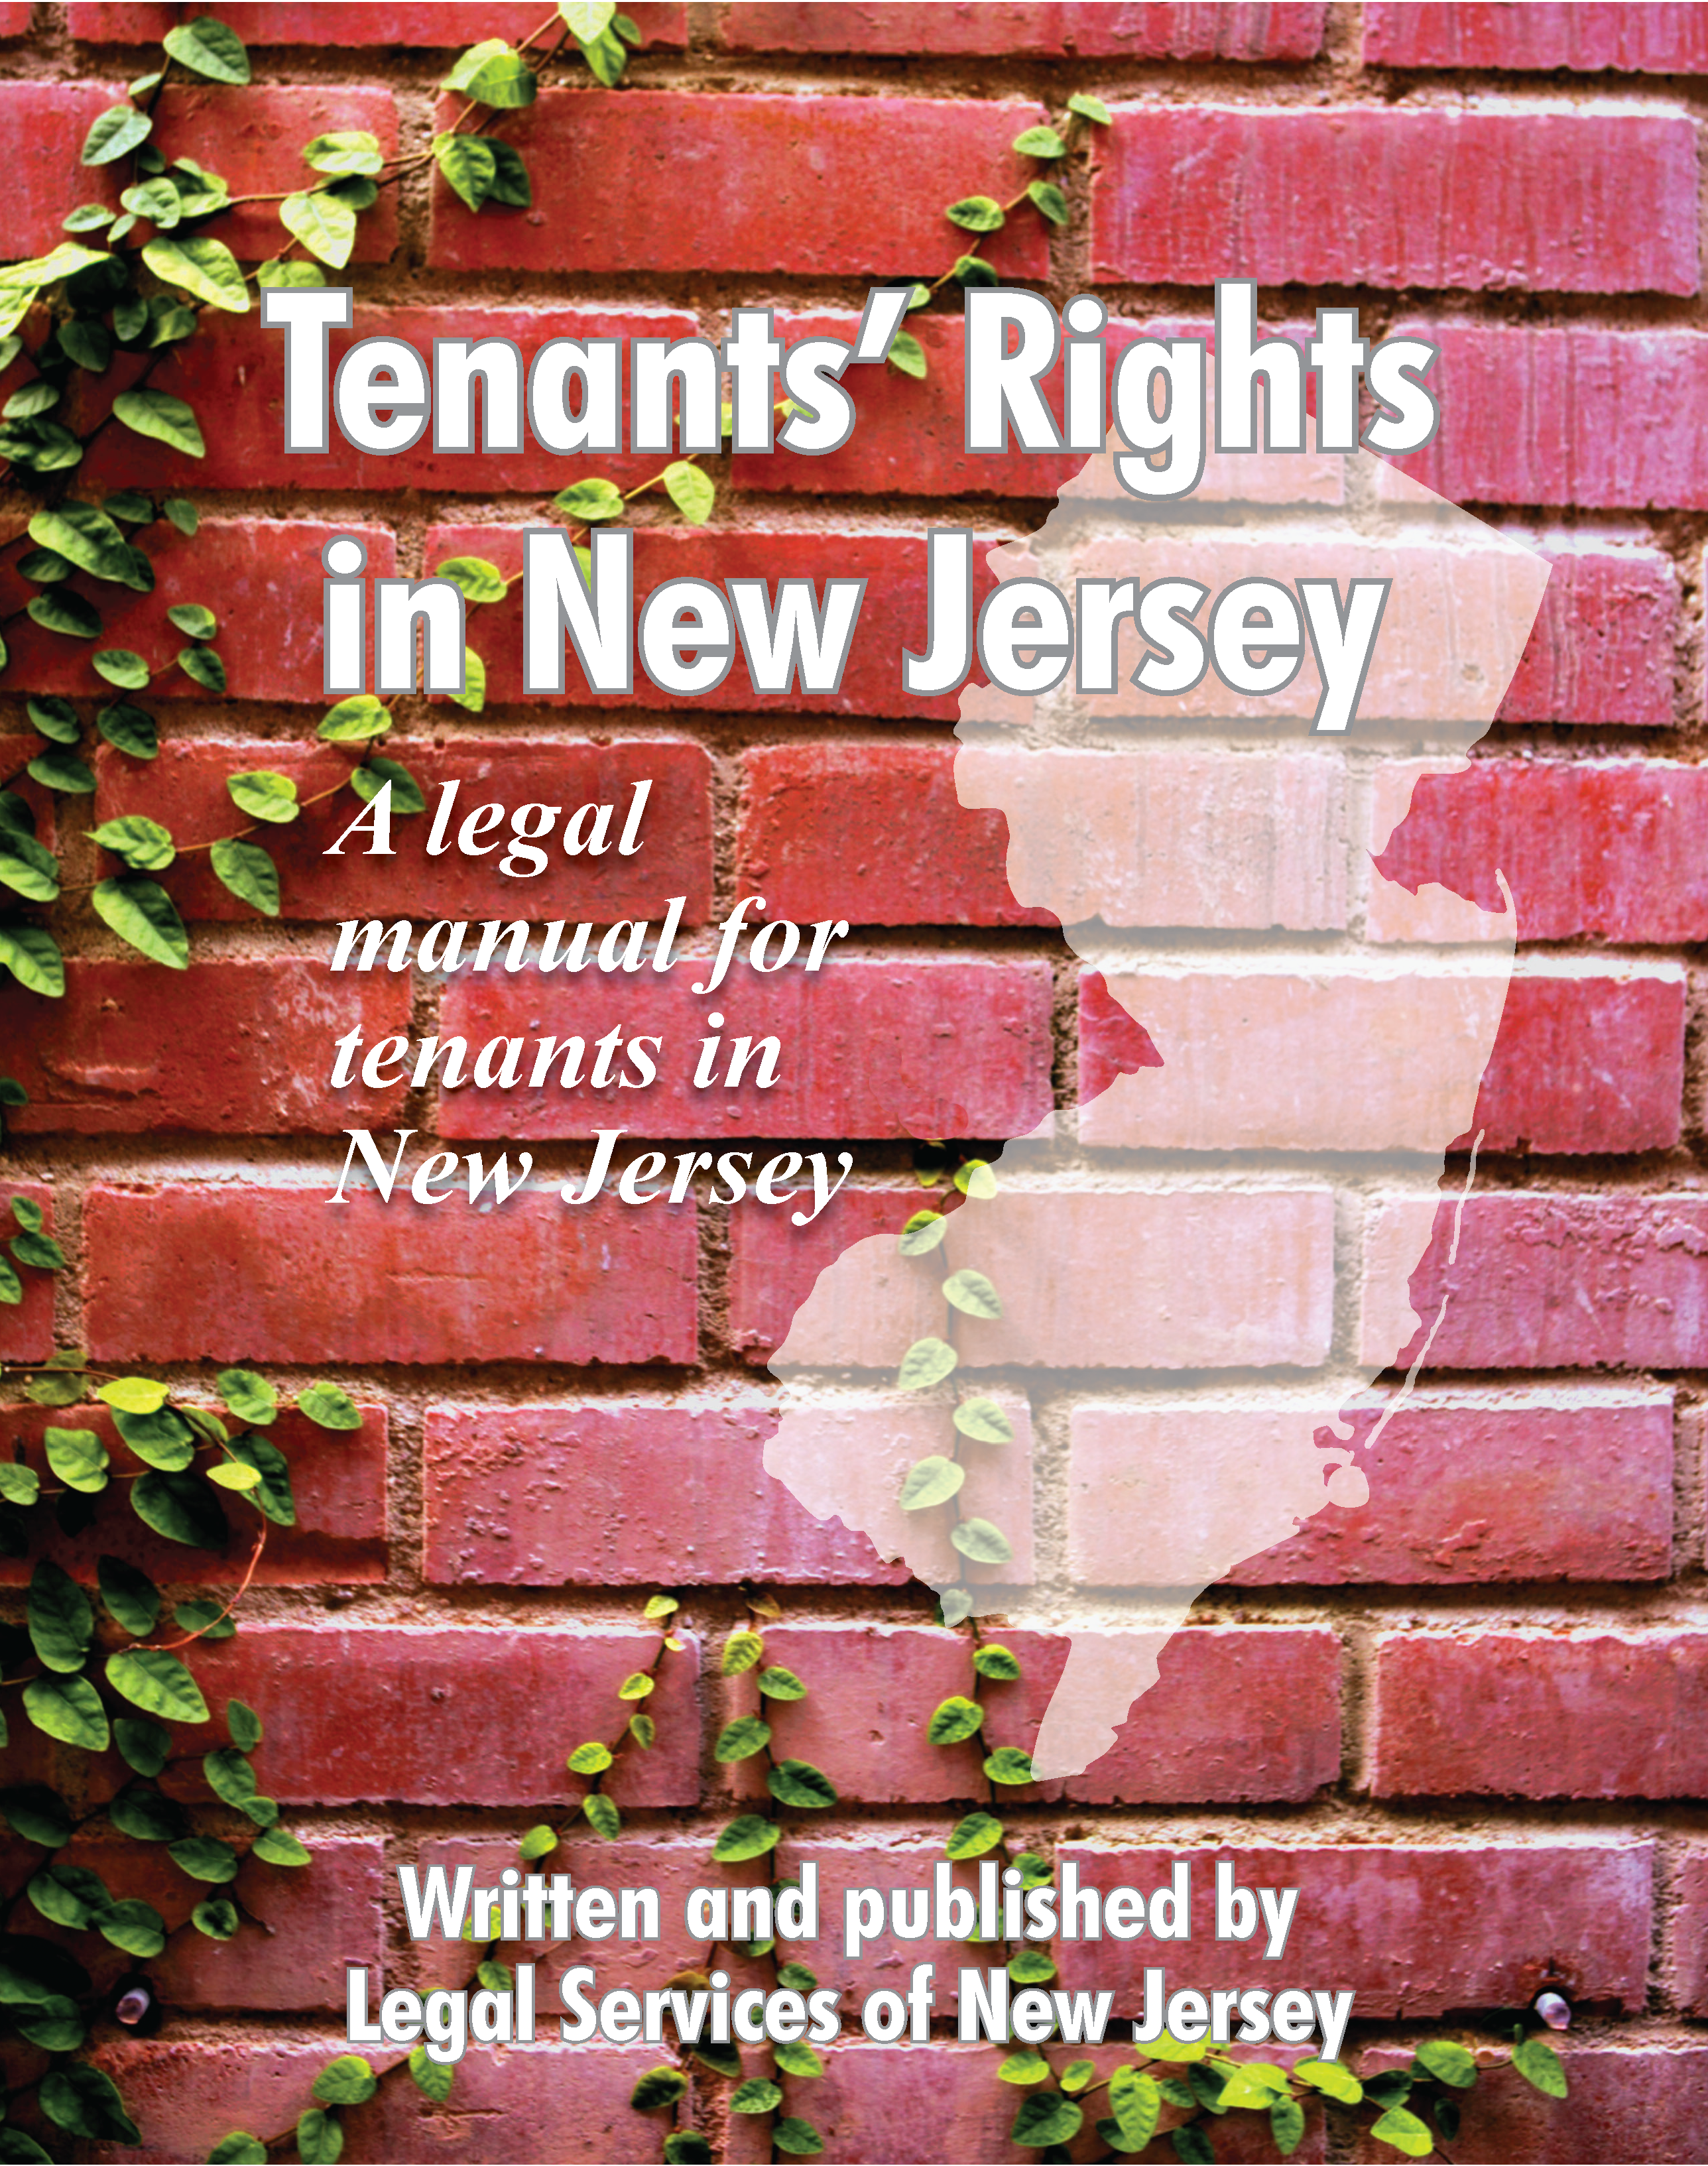 Tenants' Rights in New Jersey